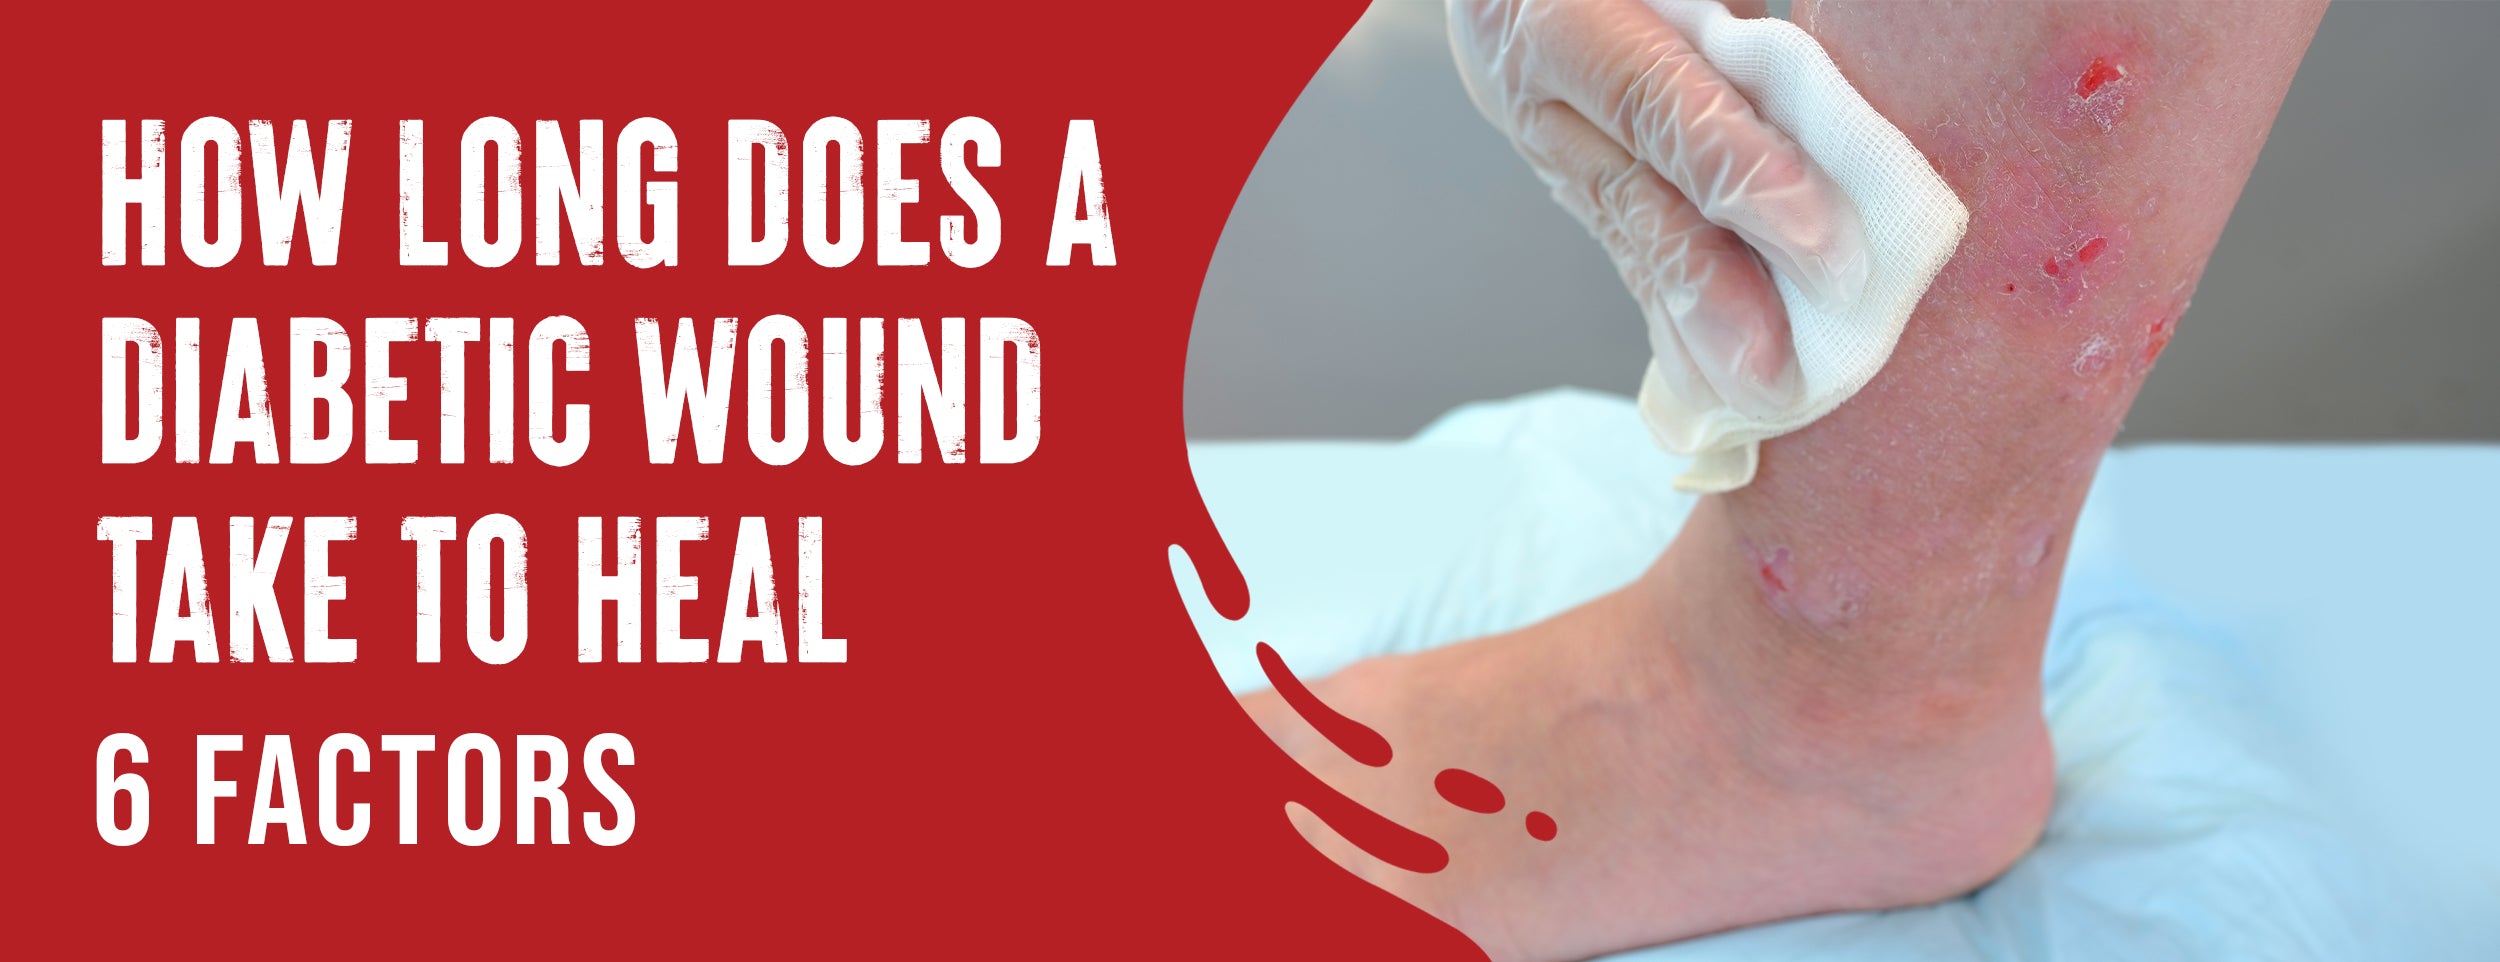 It is important to know how long it takes for a diabetic wound to heal